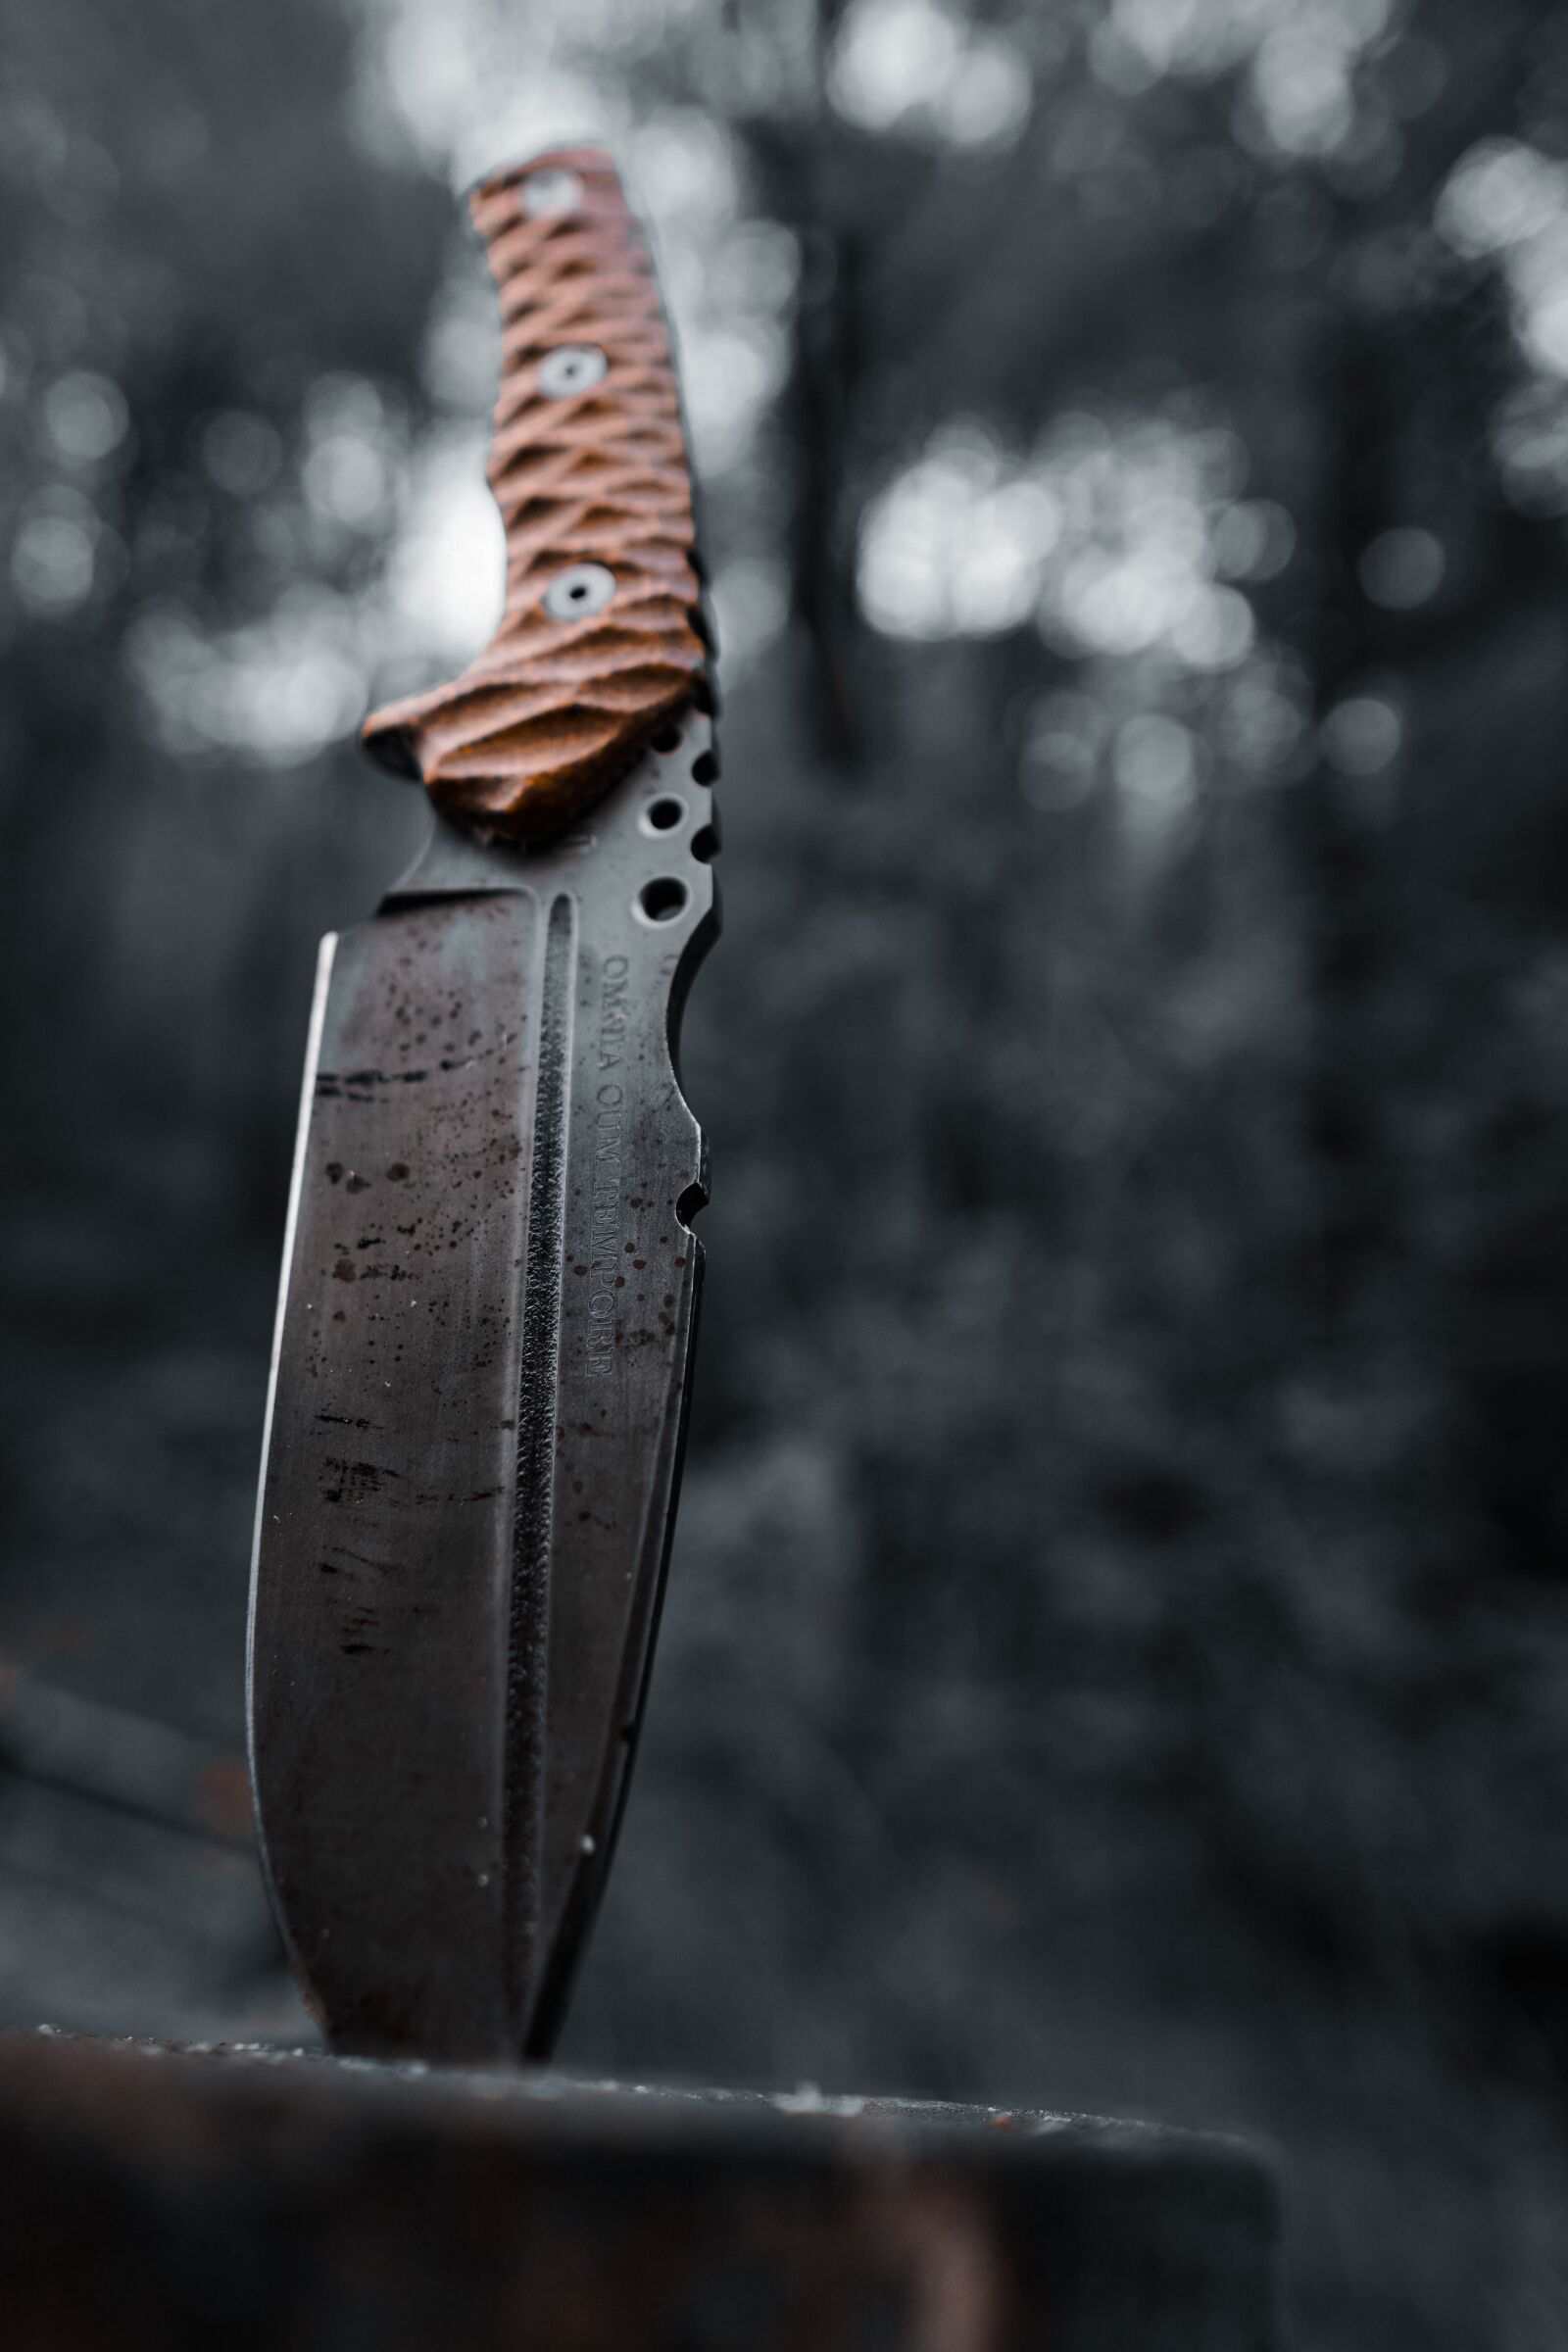 Sony a6400 sample photo. Knife, forest, nature photography